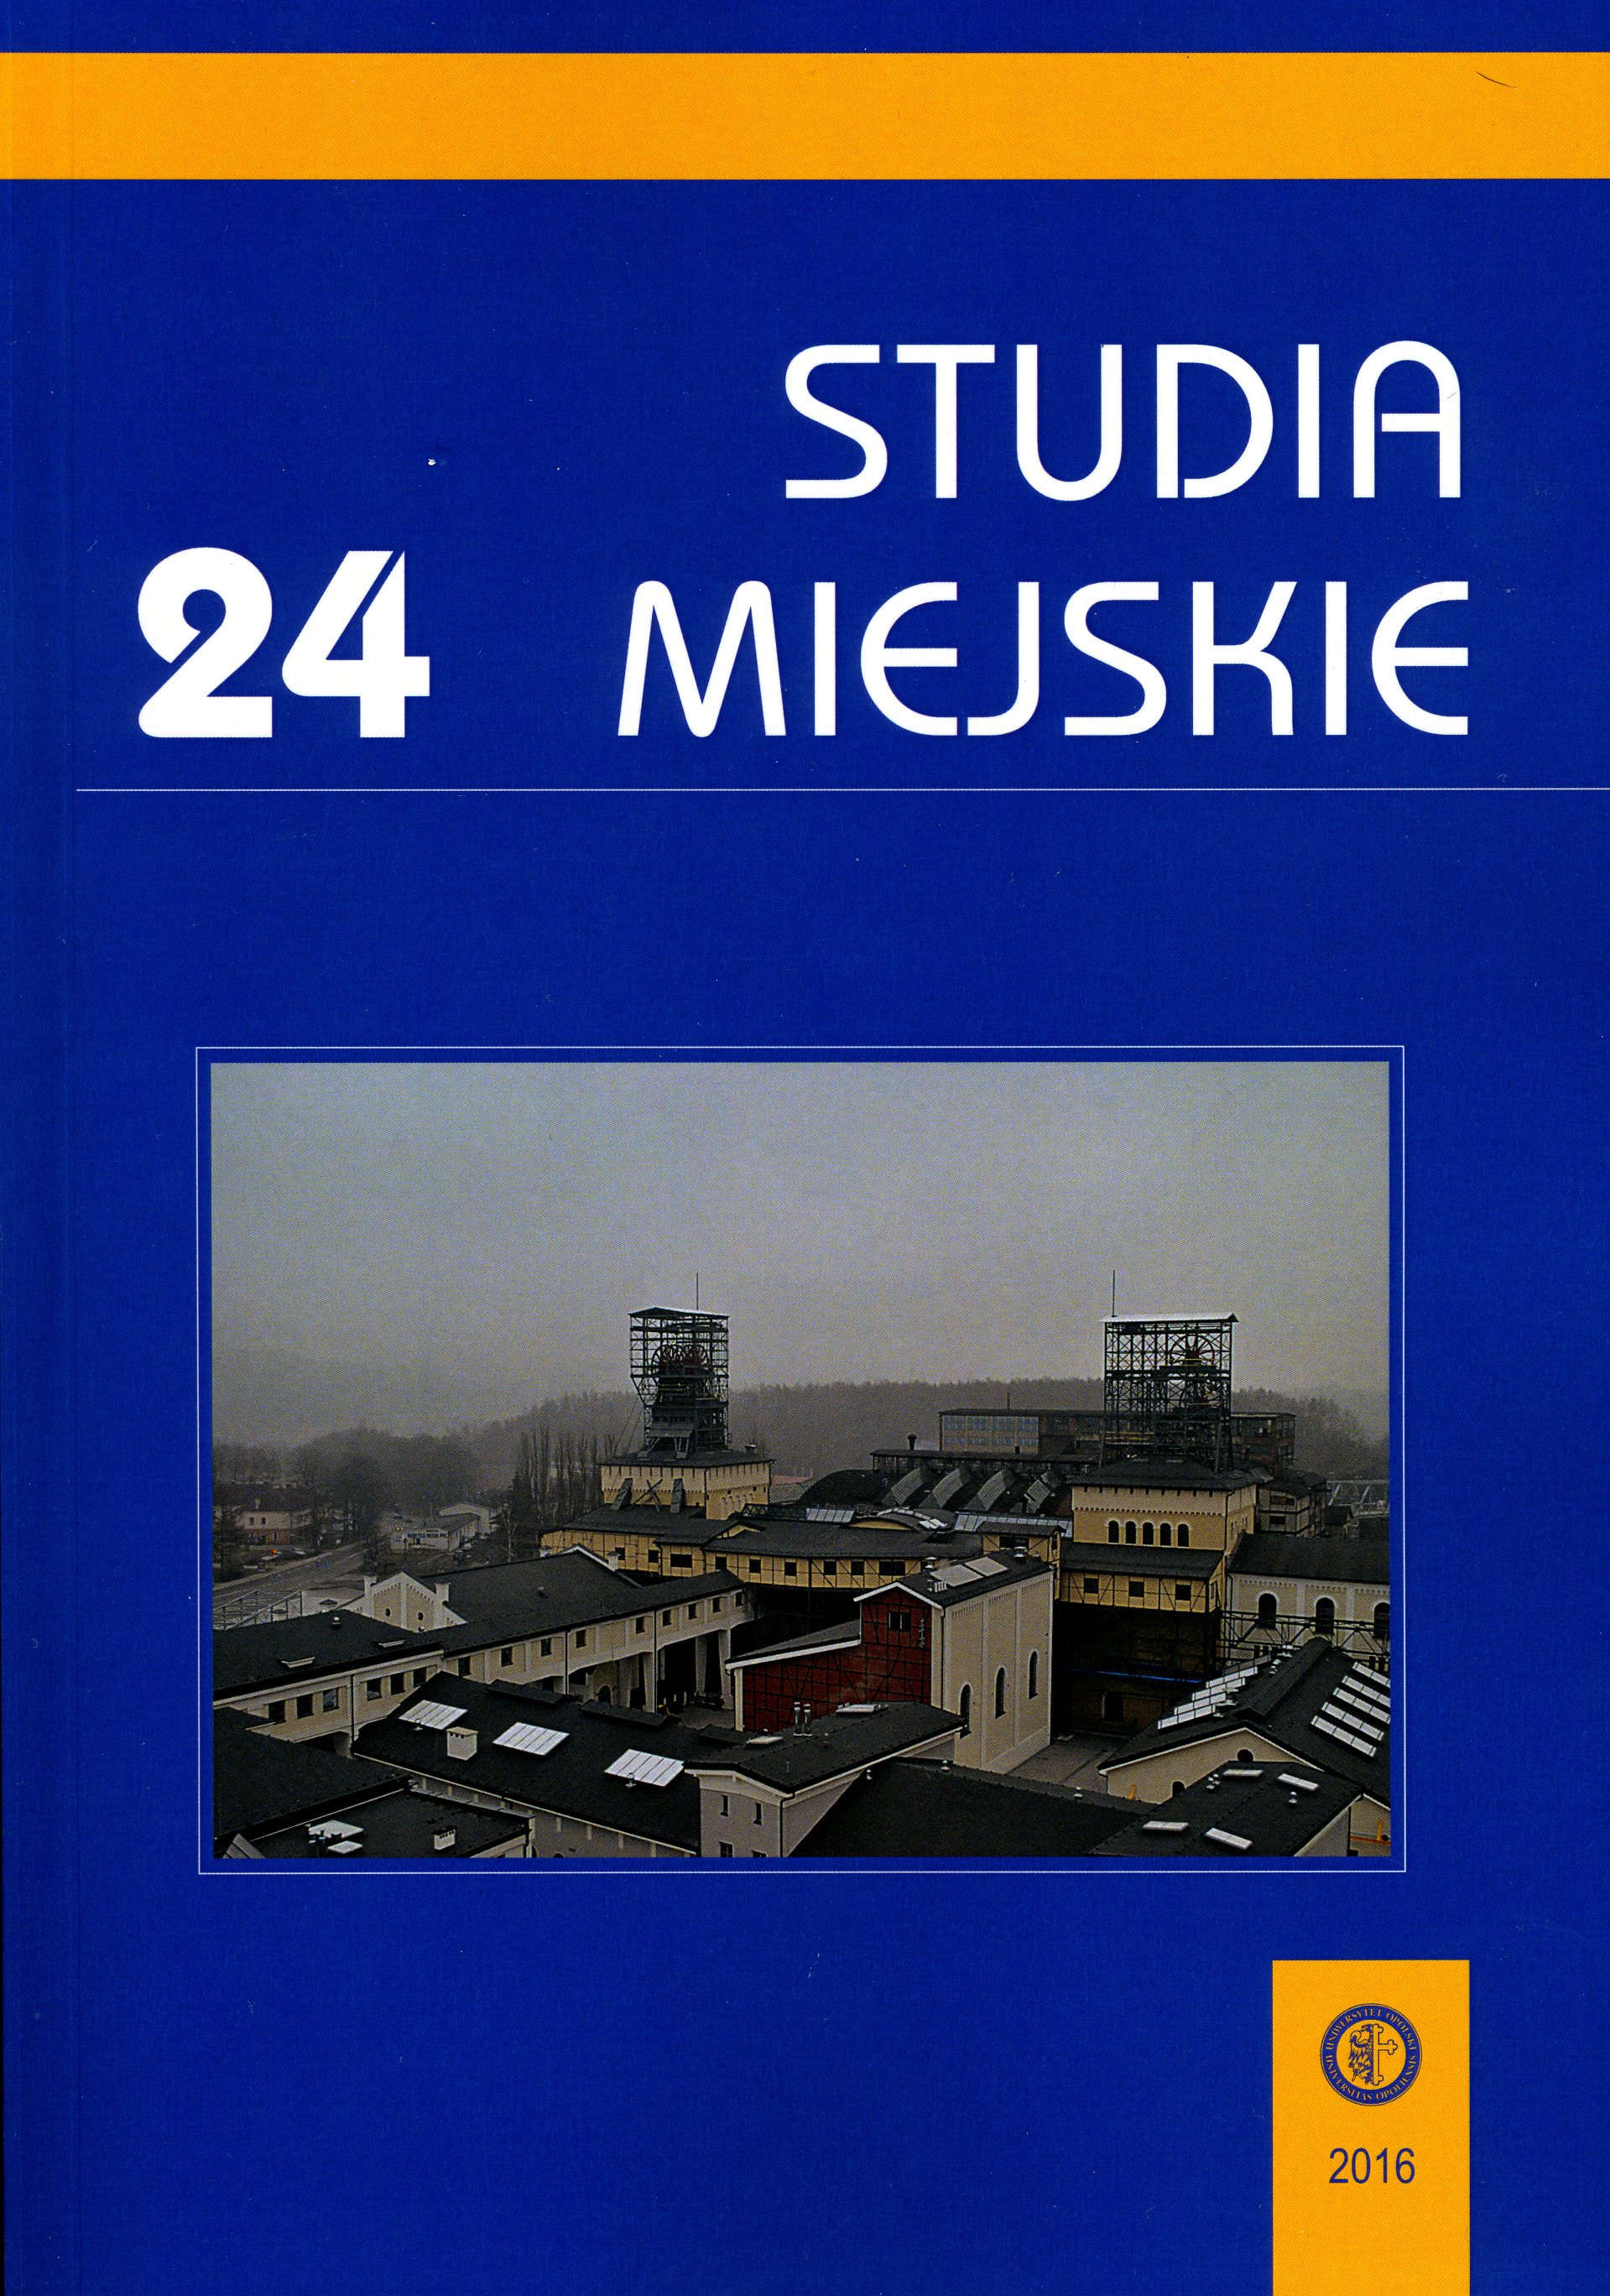 Medium-sized manufacturing enterprises in Hungary: a statistical survey Cover Image